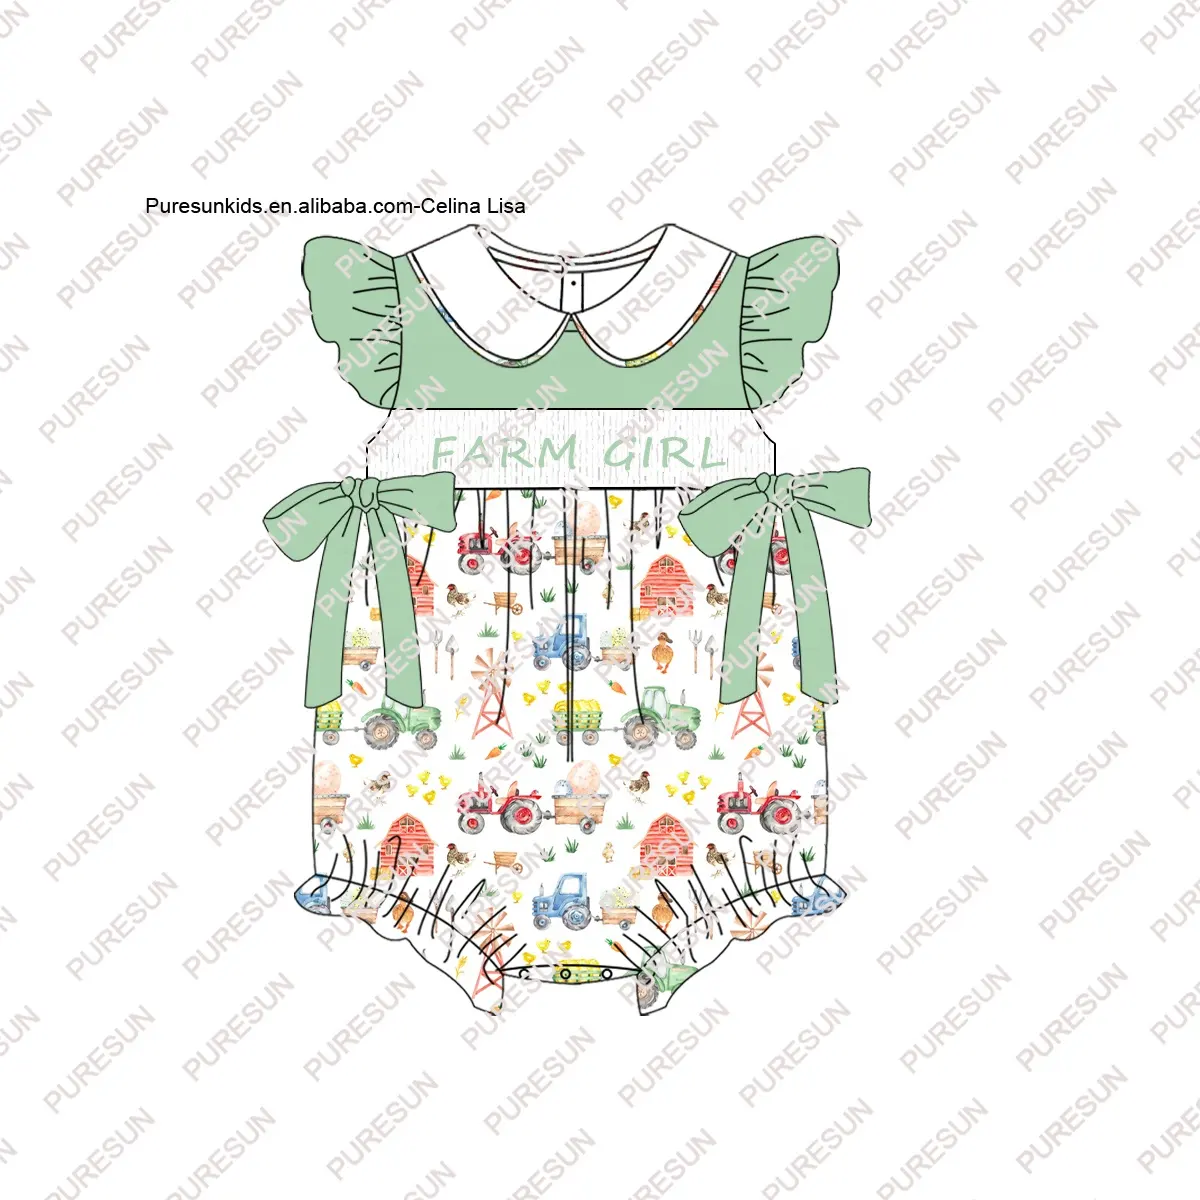 Puresun customize boutique kids clothes farm girl embroidery ruffle shorts outfit animals printed toddler sibling set